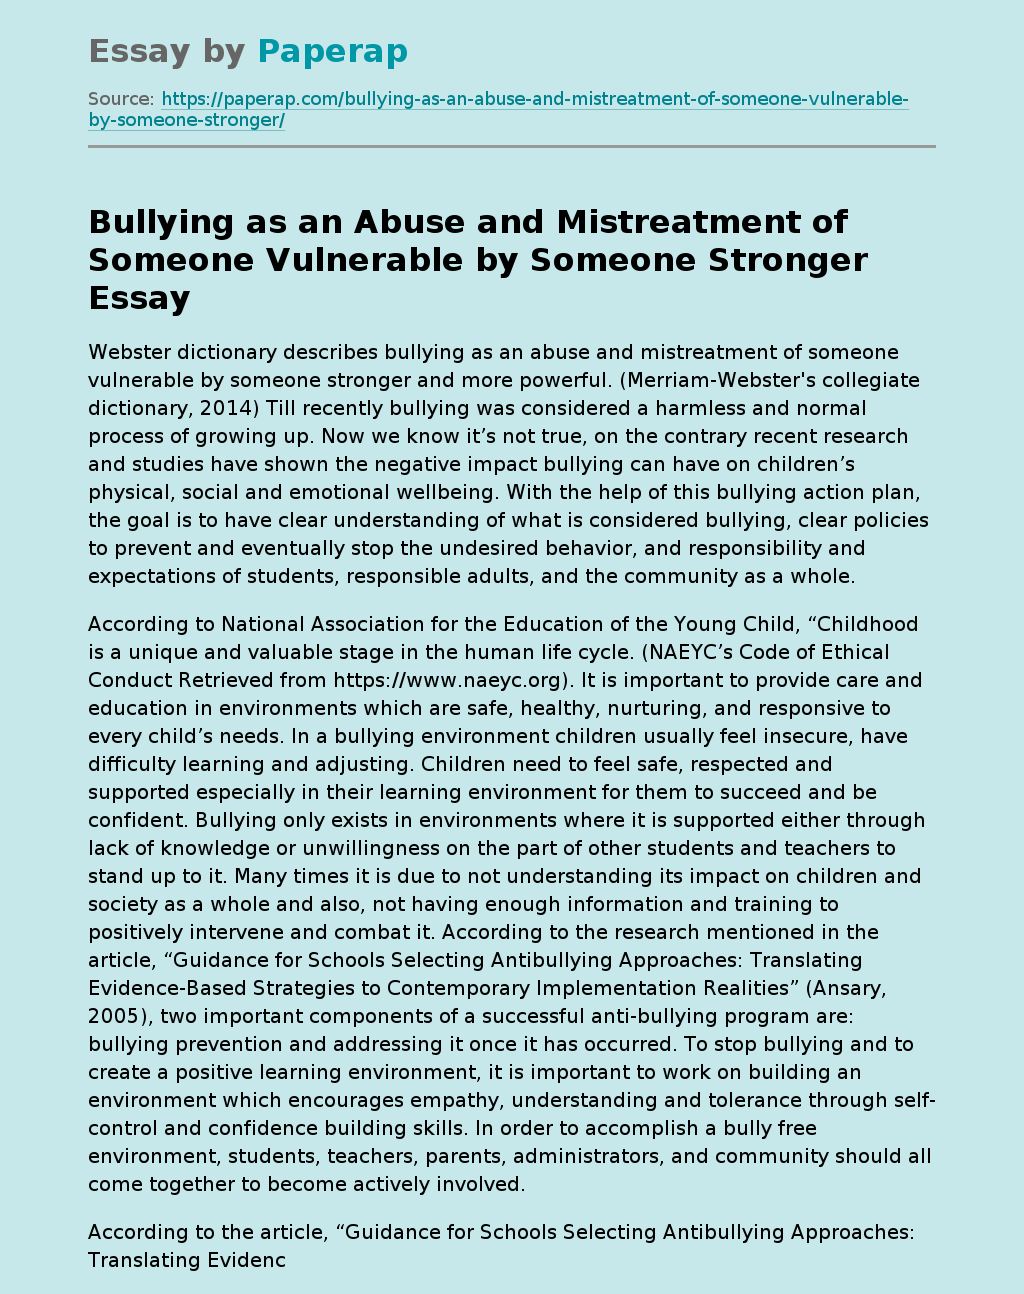 Bullying as an Abuse and Mistreatment of Someone Vulnerable by Someone Stronger